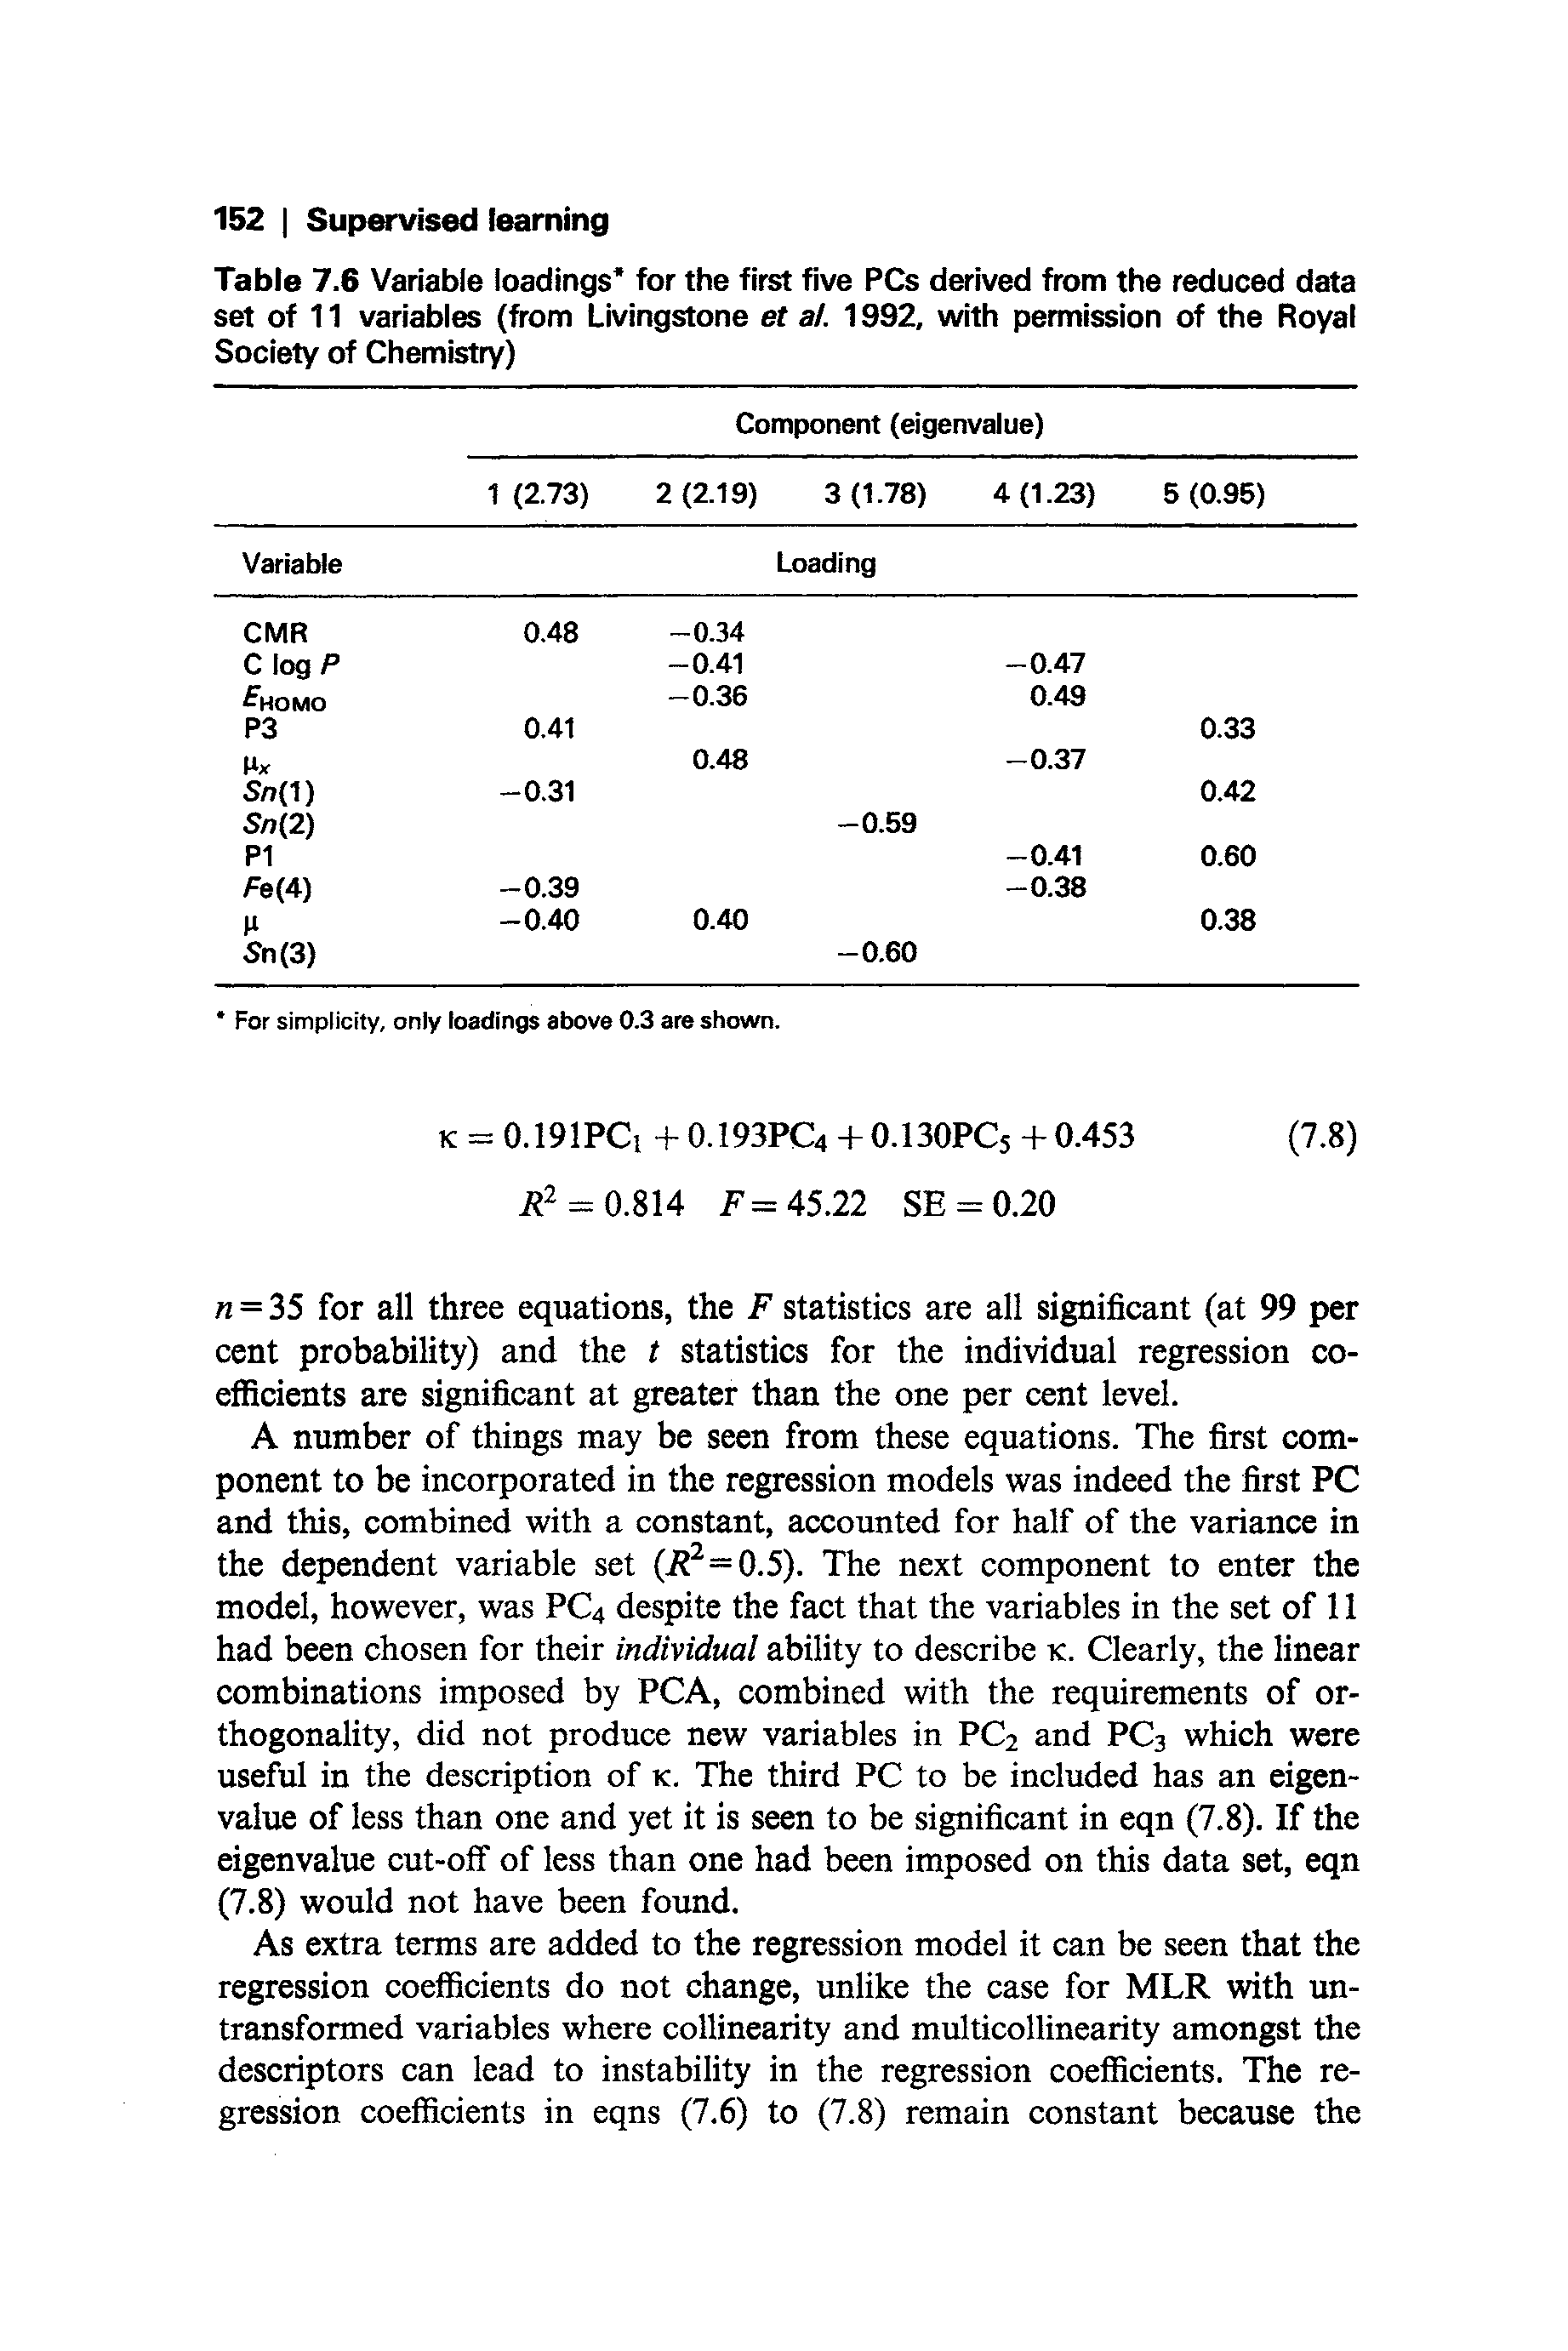 Table 7.6 Variable loadings for the first five PCs derived from the reduced data set of 11 variables (from Livingstone et al. 1992, with permission of the Royal Society of Chemistry)...